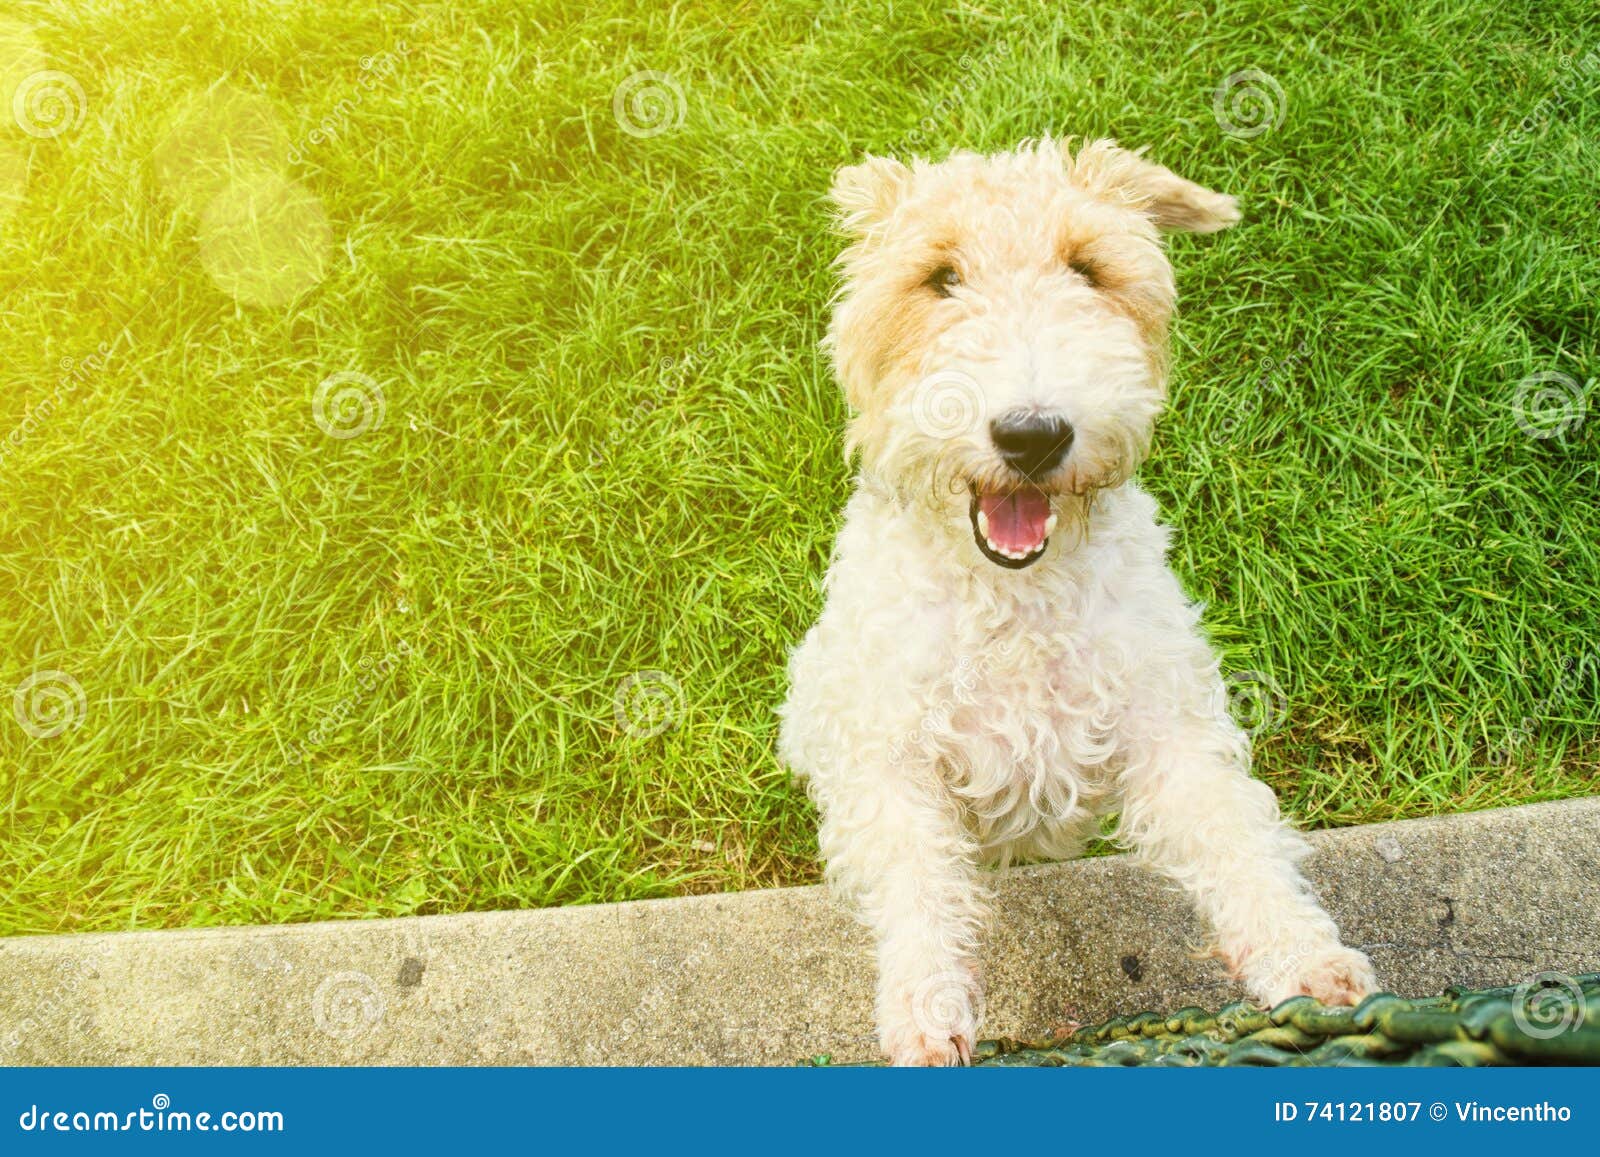 Soft Coated Wheaten Terrier Dog Breed Information